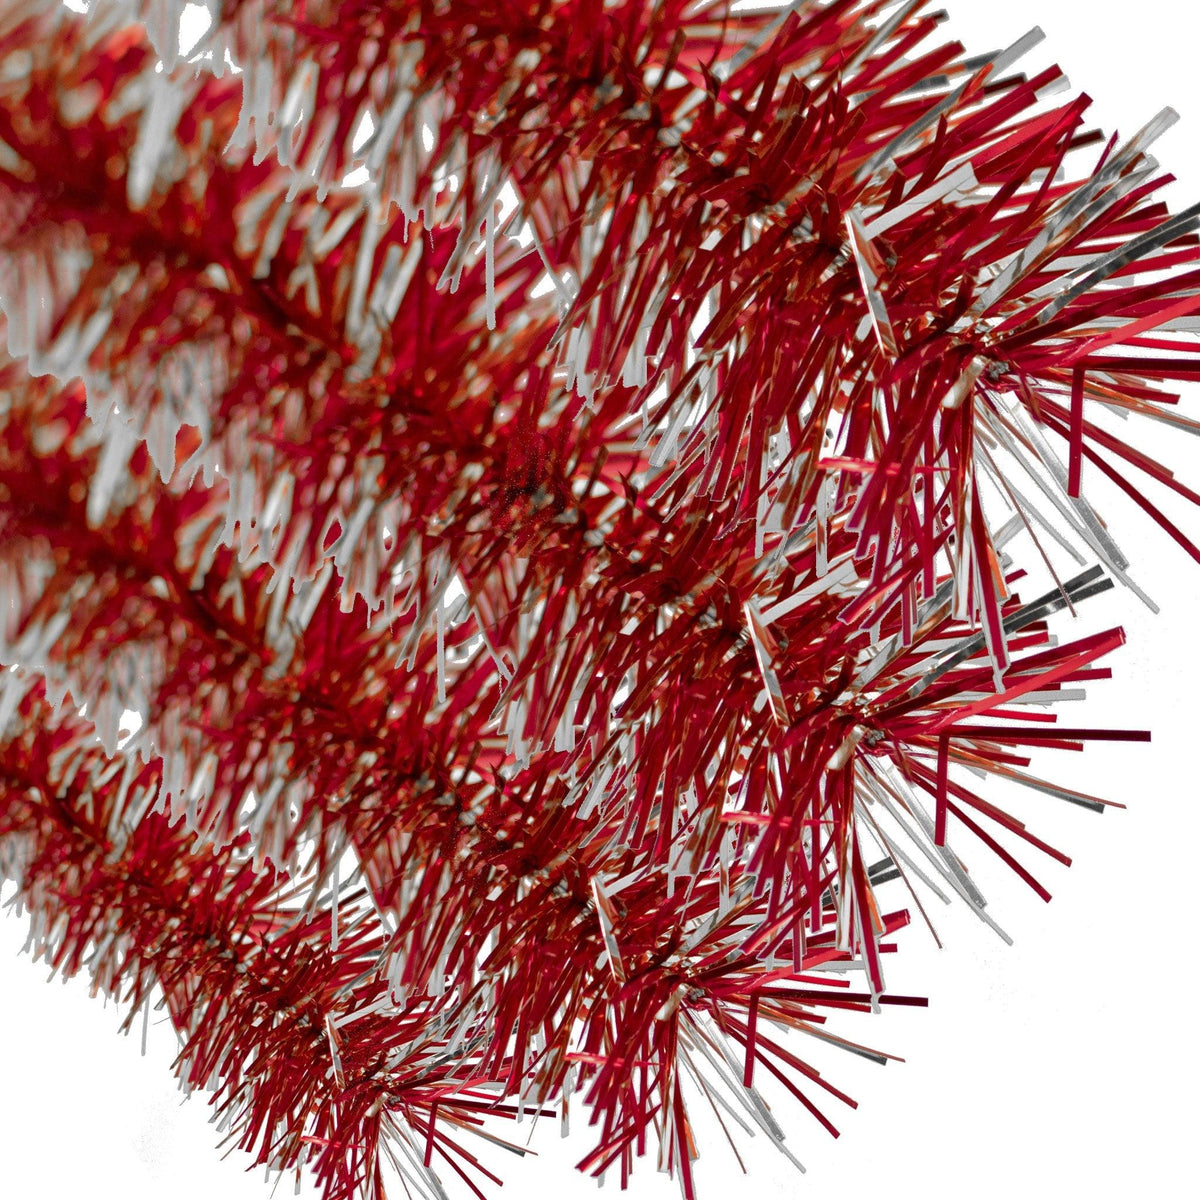 Lee Display's brand new 25ft Shiny Red and Metallic Silver Tinsel Garlands and Fringe Embellishments on sale at leedisplay.com